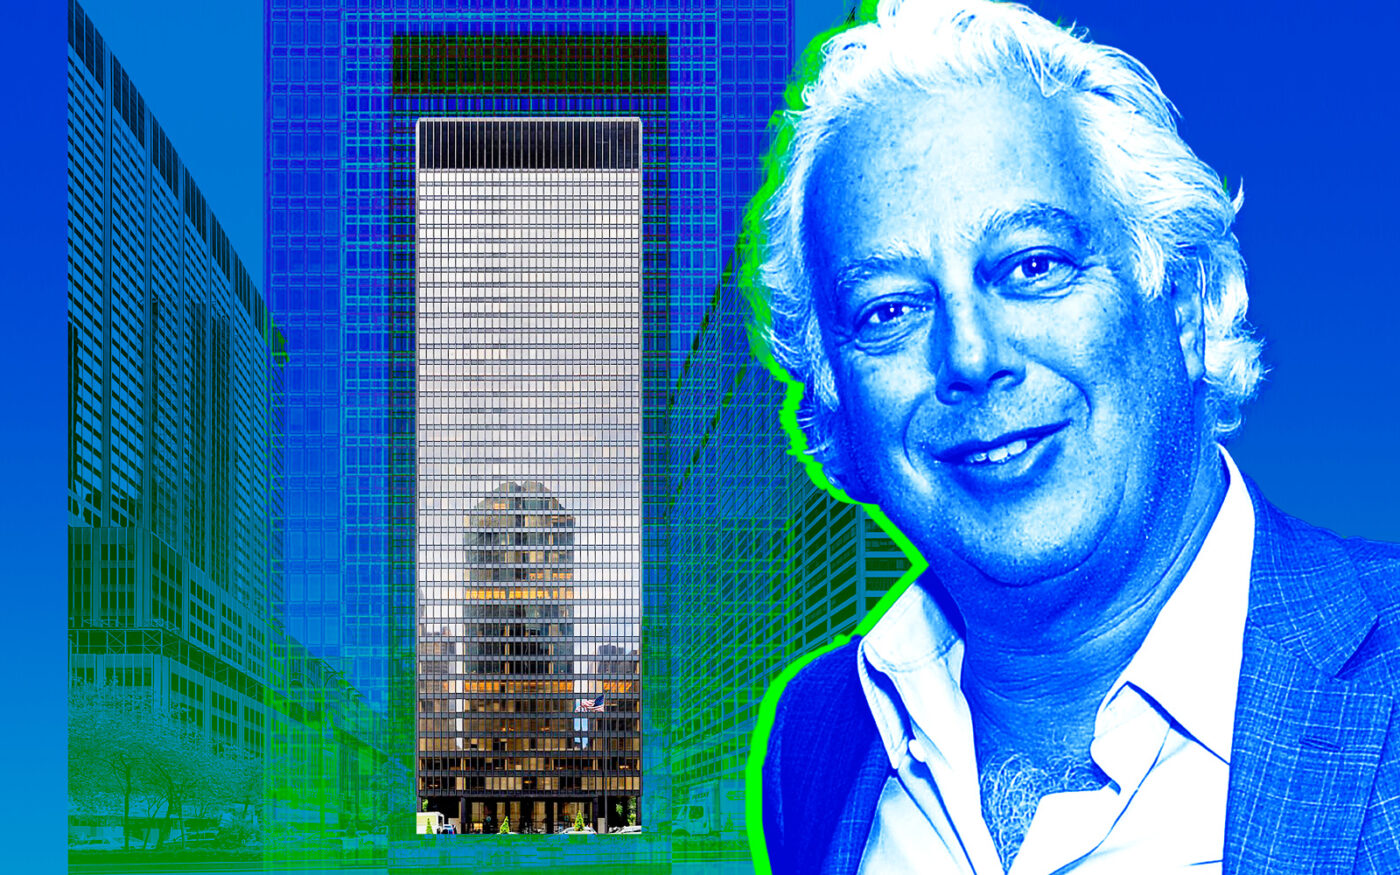 RFR's Aby Rosen and 375 Park Avenue